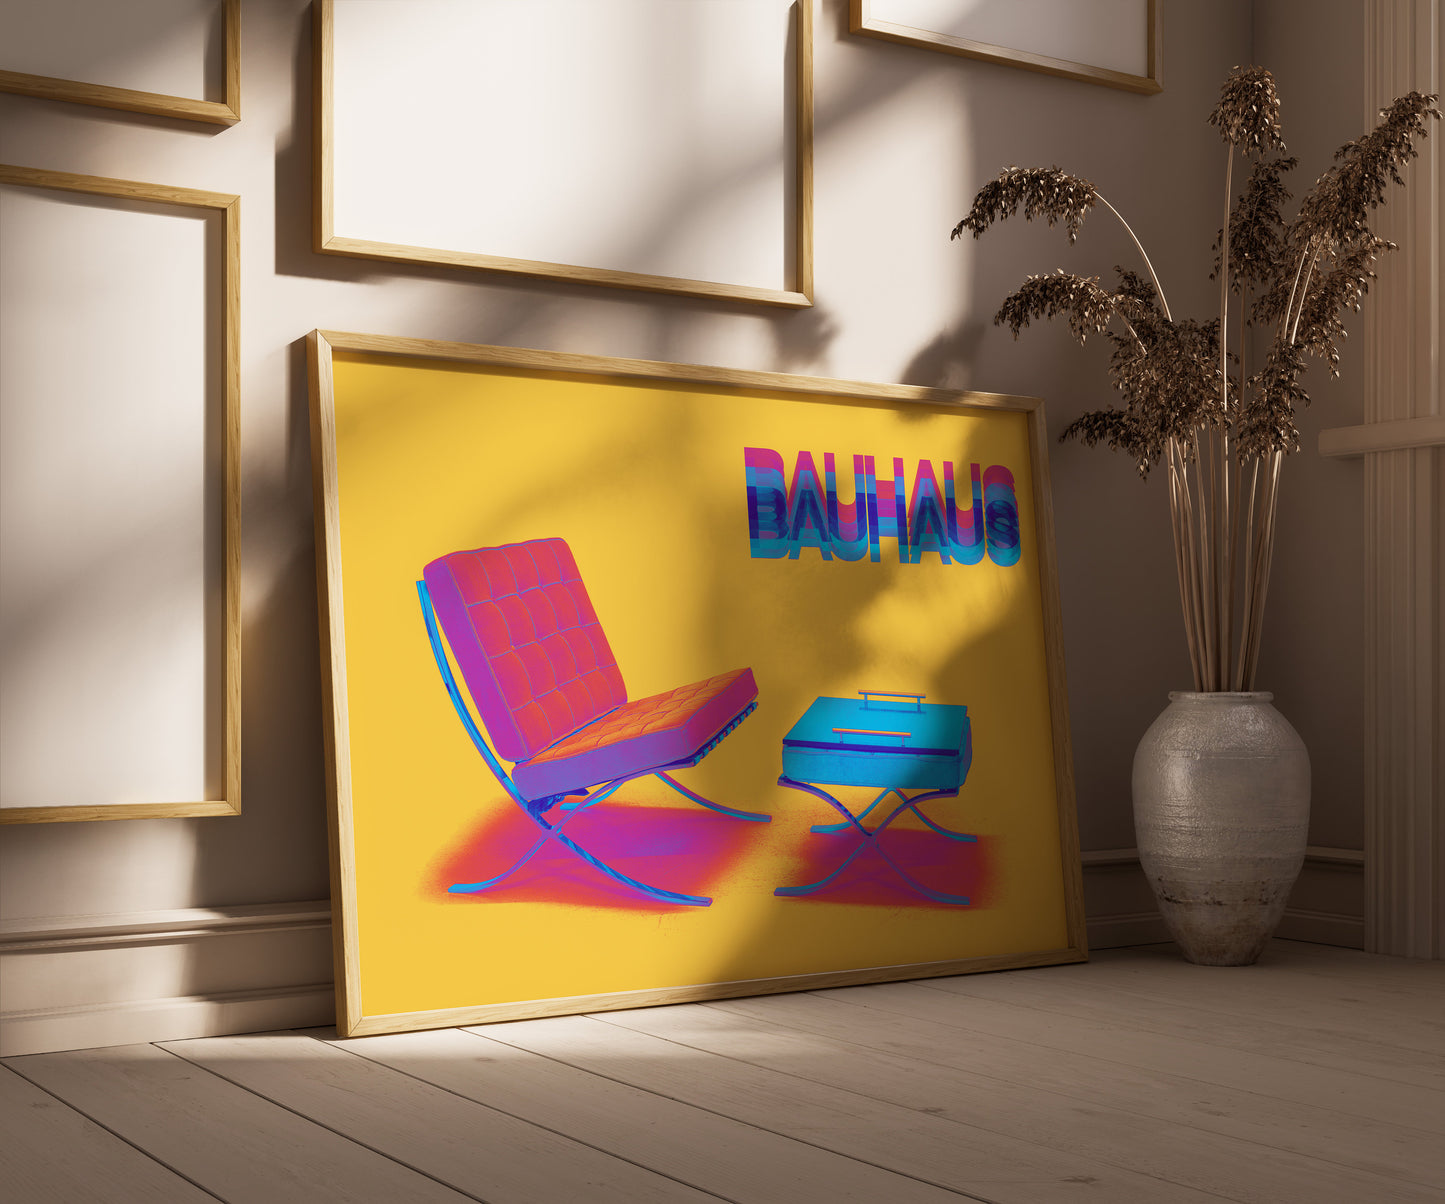 The Chair and Ottoman | Vintage Bauhaus Exhibition Poster Color Pop Andy Warhol Style (available framed or unframed)